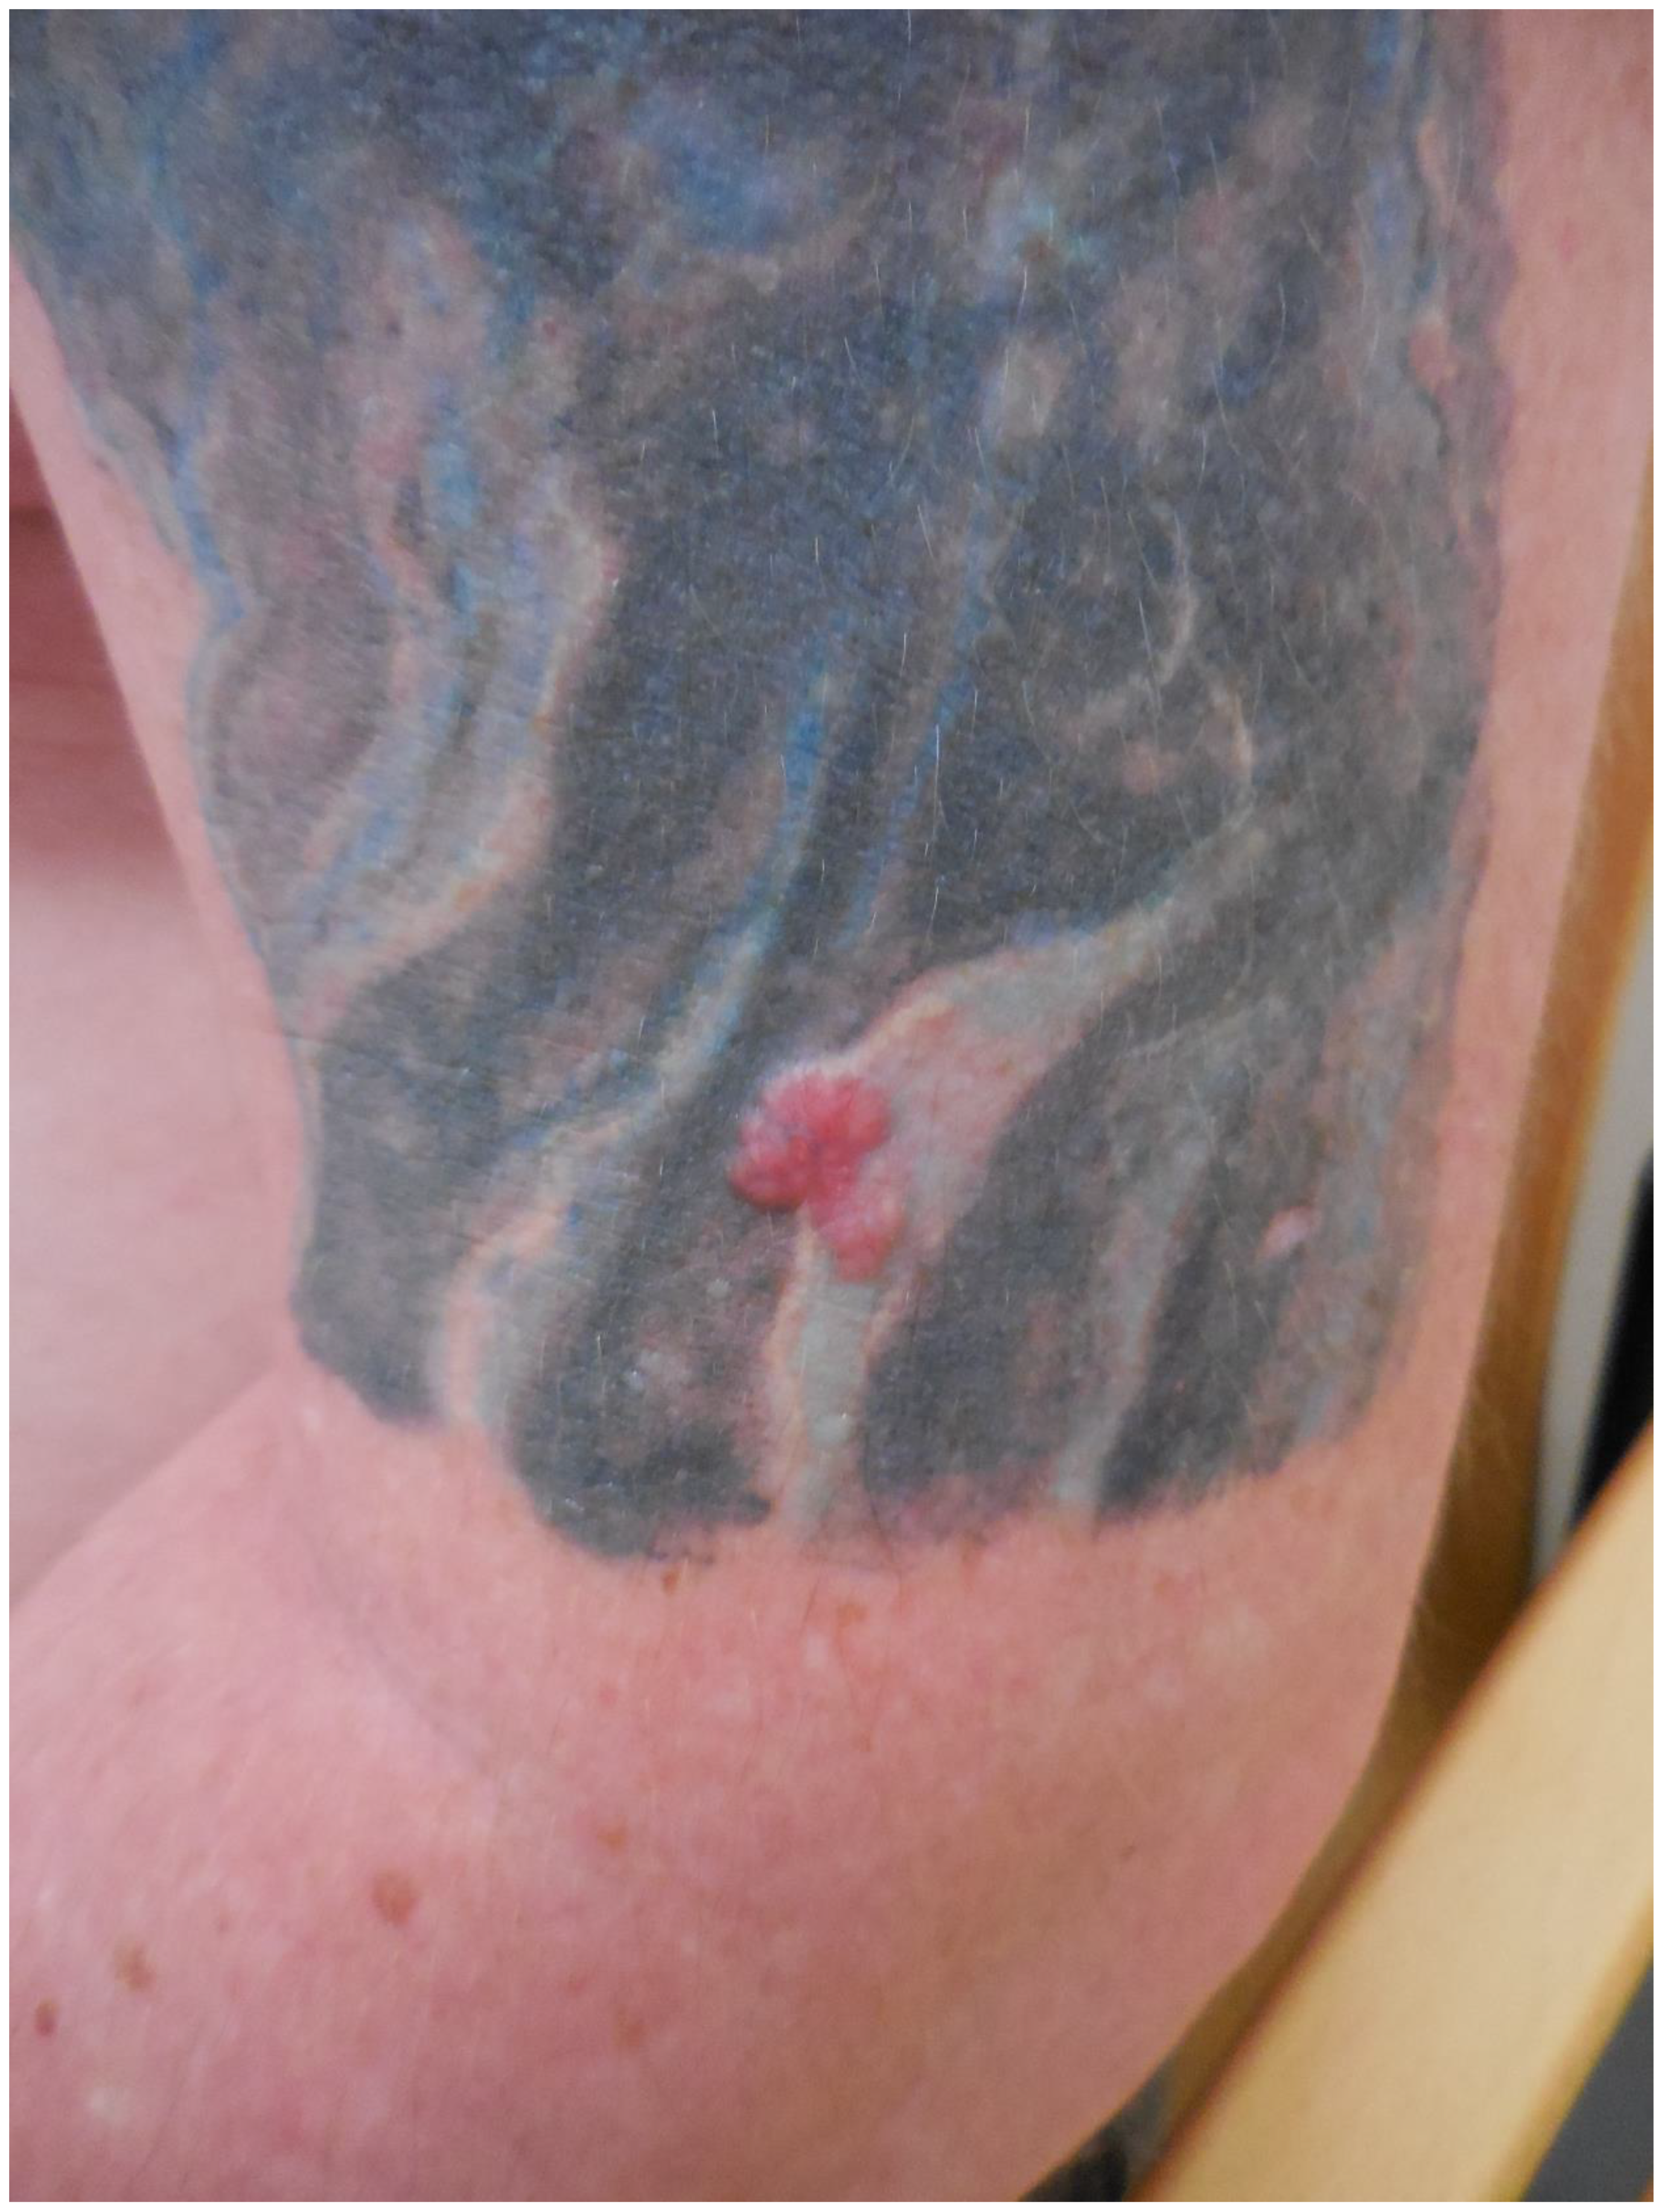 Current Oncology | Free Full-Text | Cutaneous Malignancies in Tattoos, a  Case Series of Six Patients